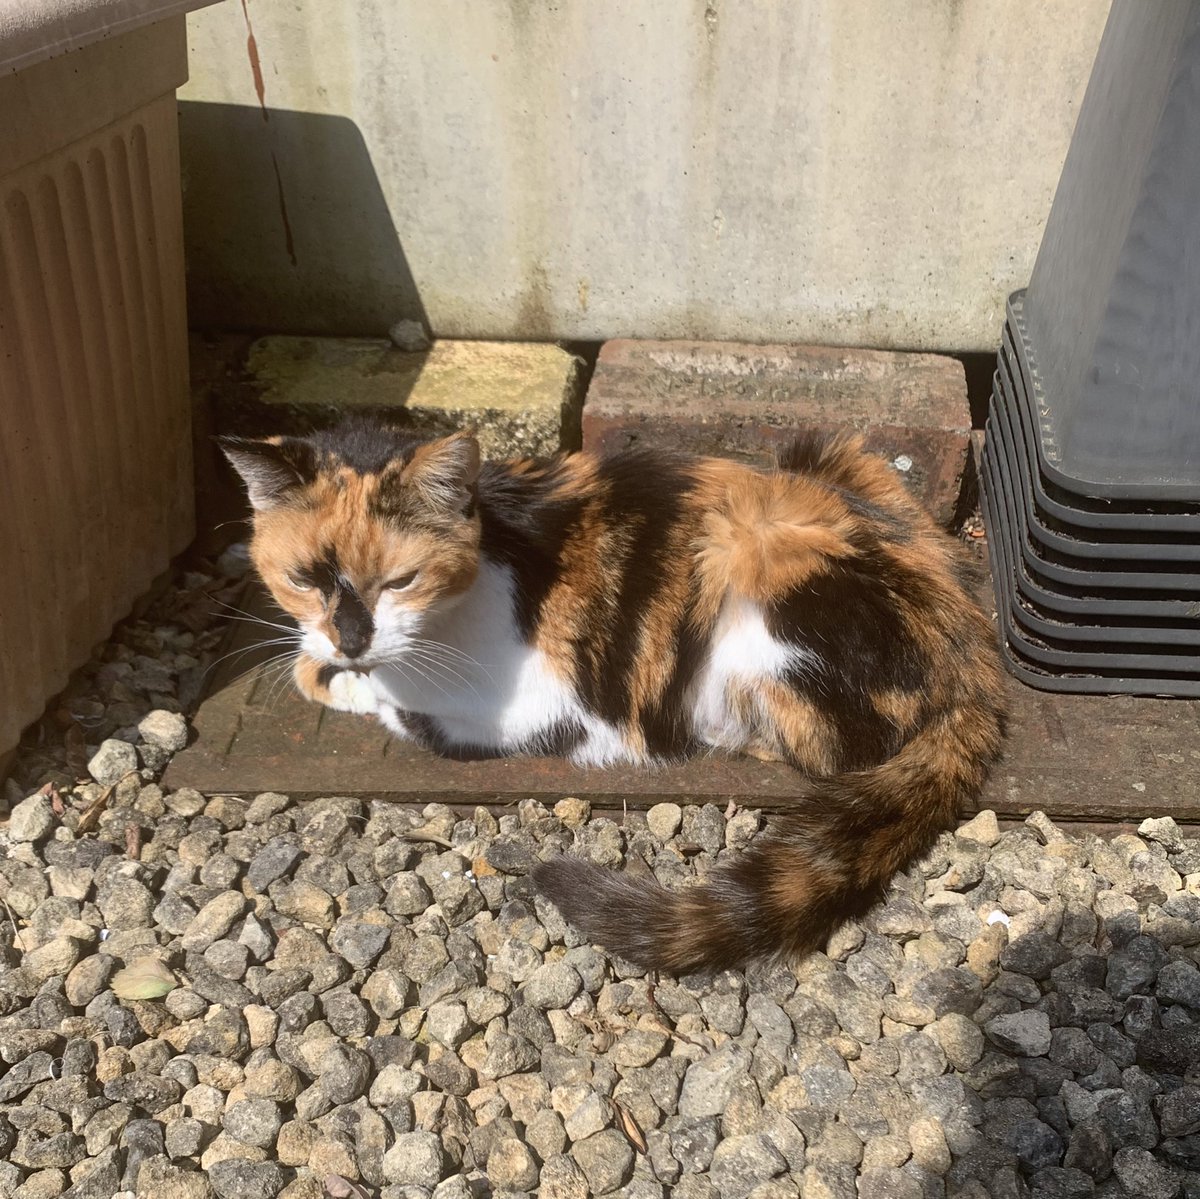 #CatBoxSunday #Hedgewatch #CatsOfTwitter It’s a lovely sunny day in Shropshire and Arwen has parked herself in a warm spot. Mum has moved her now because she’s worried about the metal getting too hot.